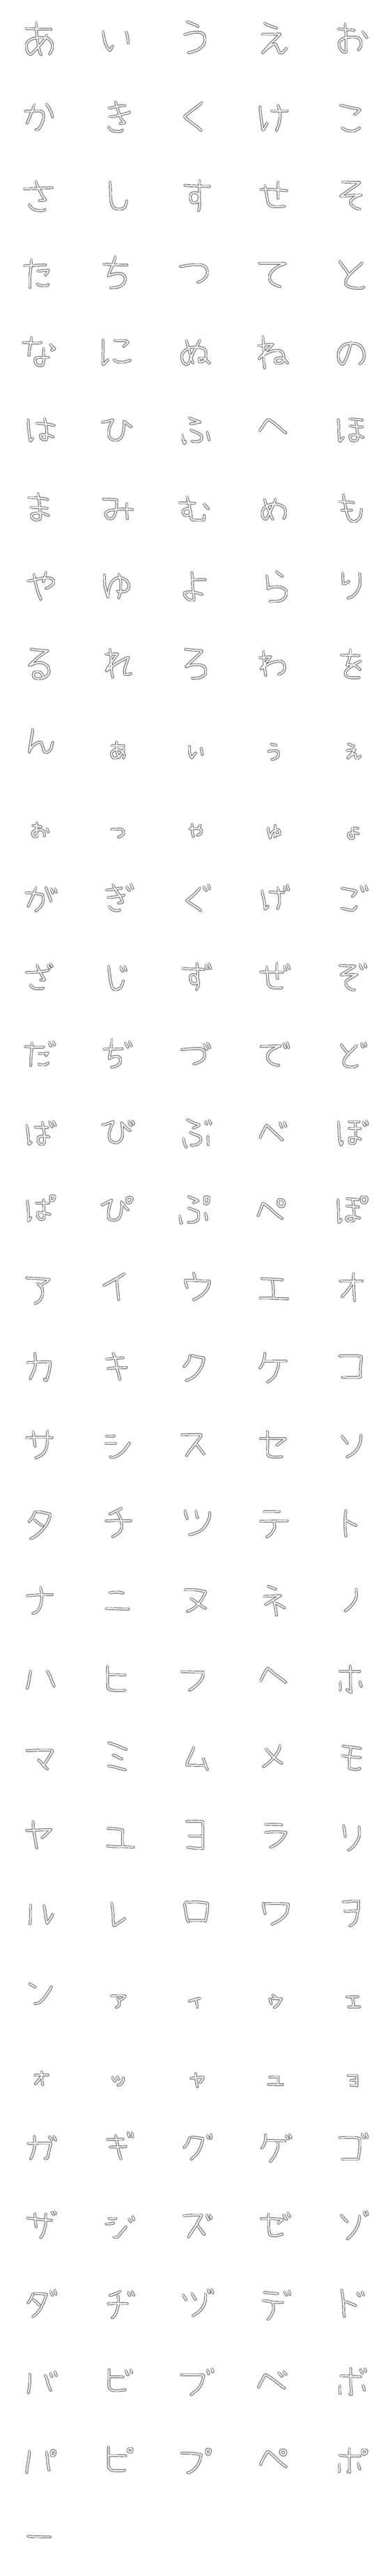 [LINE絵文字]黒ぶち文字の画像一覧